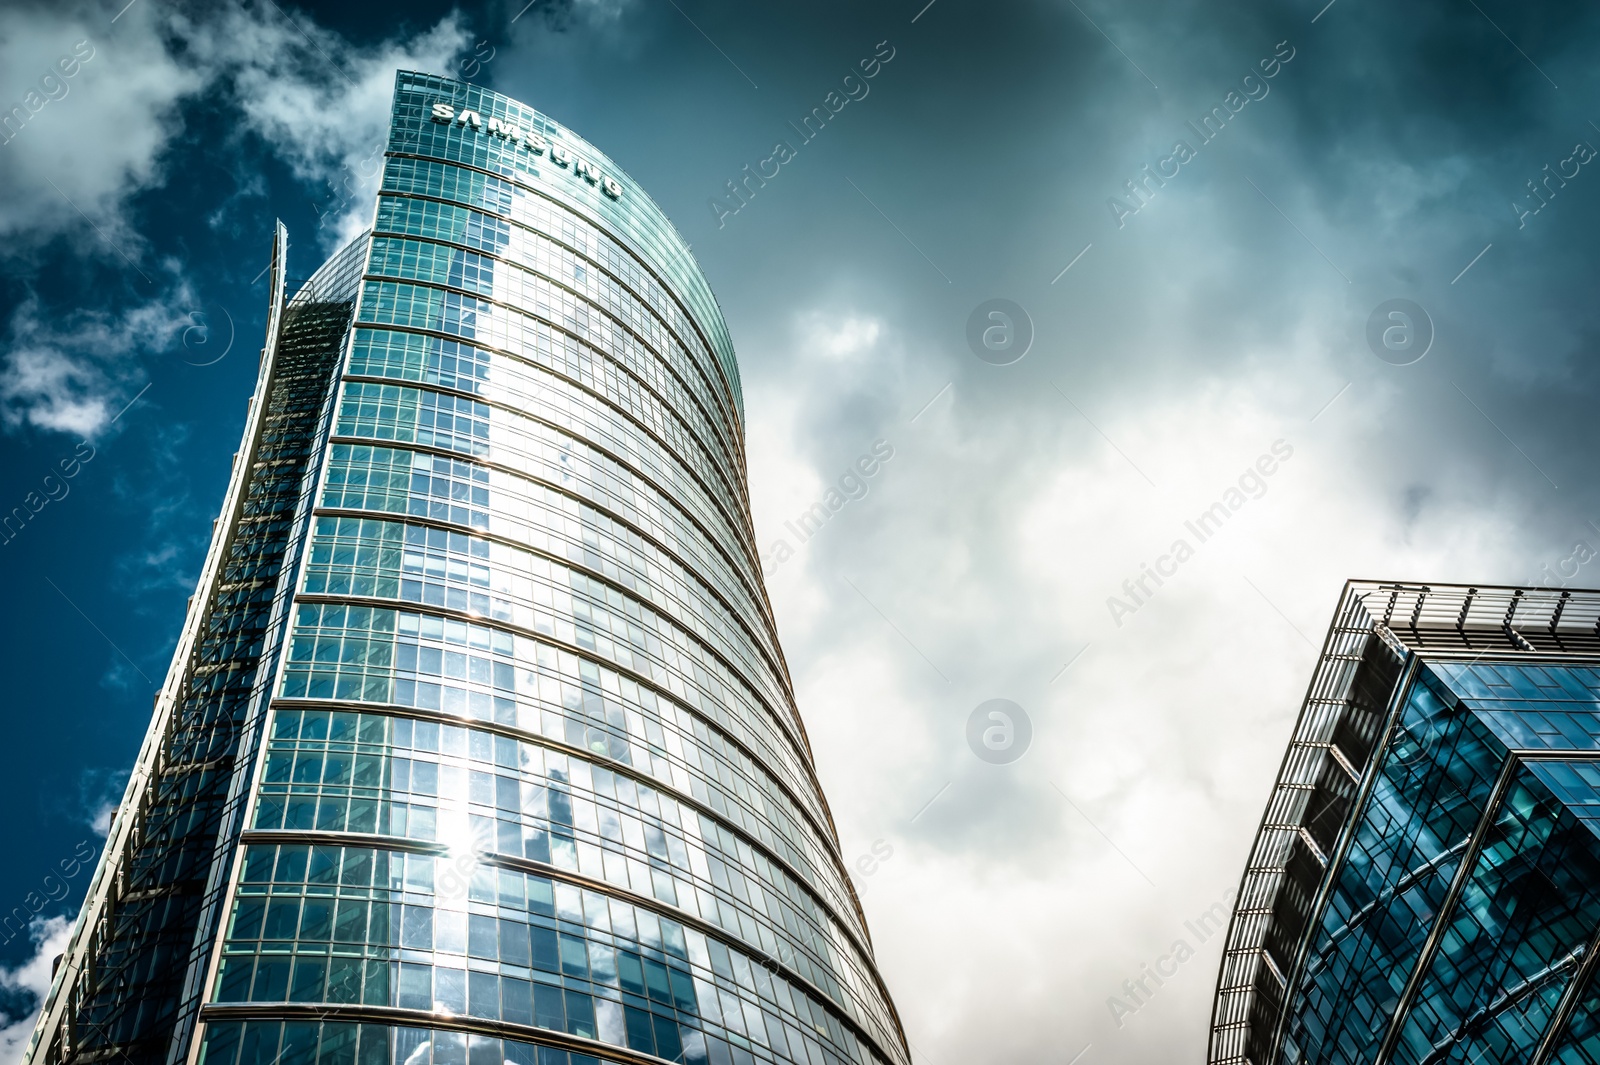 Photo of Warsaw, Poland - May 28, 2022: Beautiful Samsung building under cloudy sky, low angle view